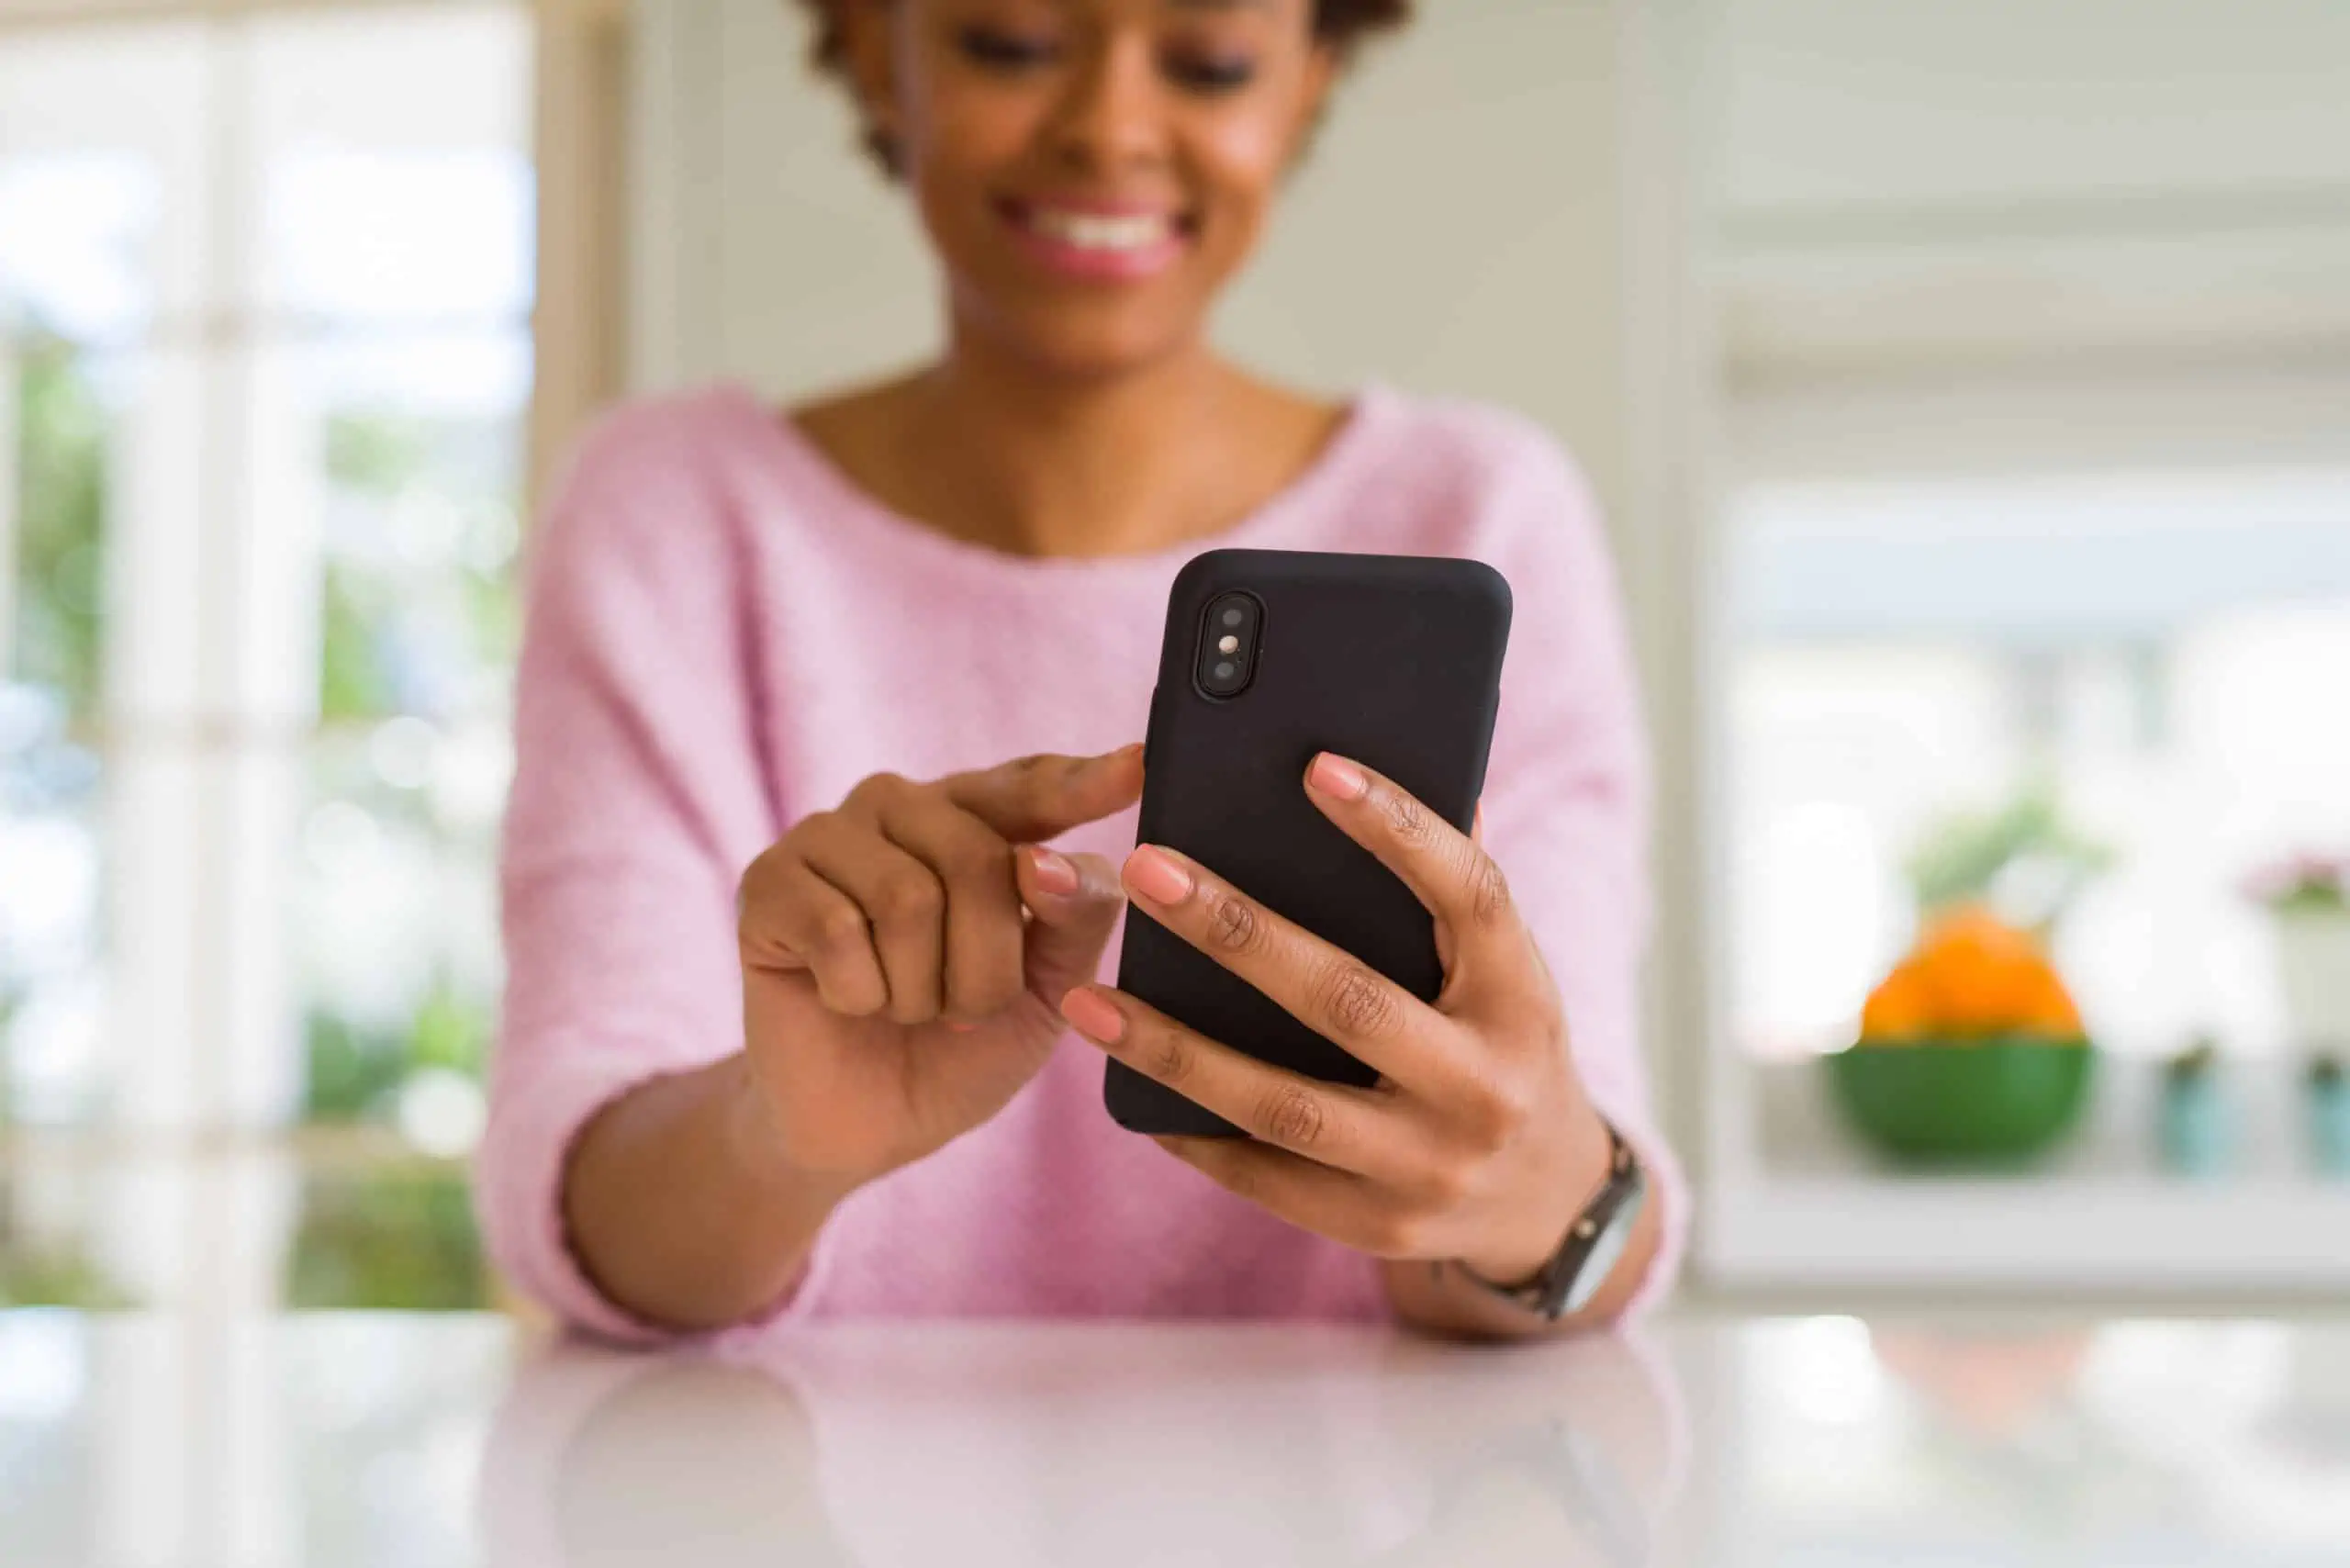 Black woman in a pink sweater using a smartphone and smiling